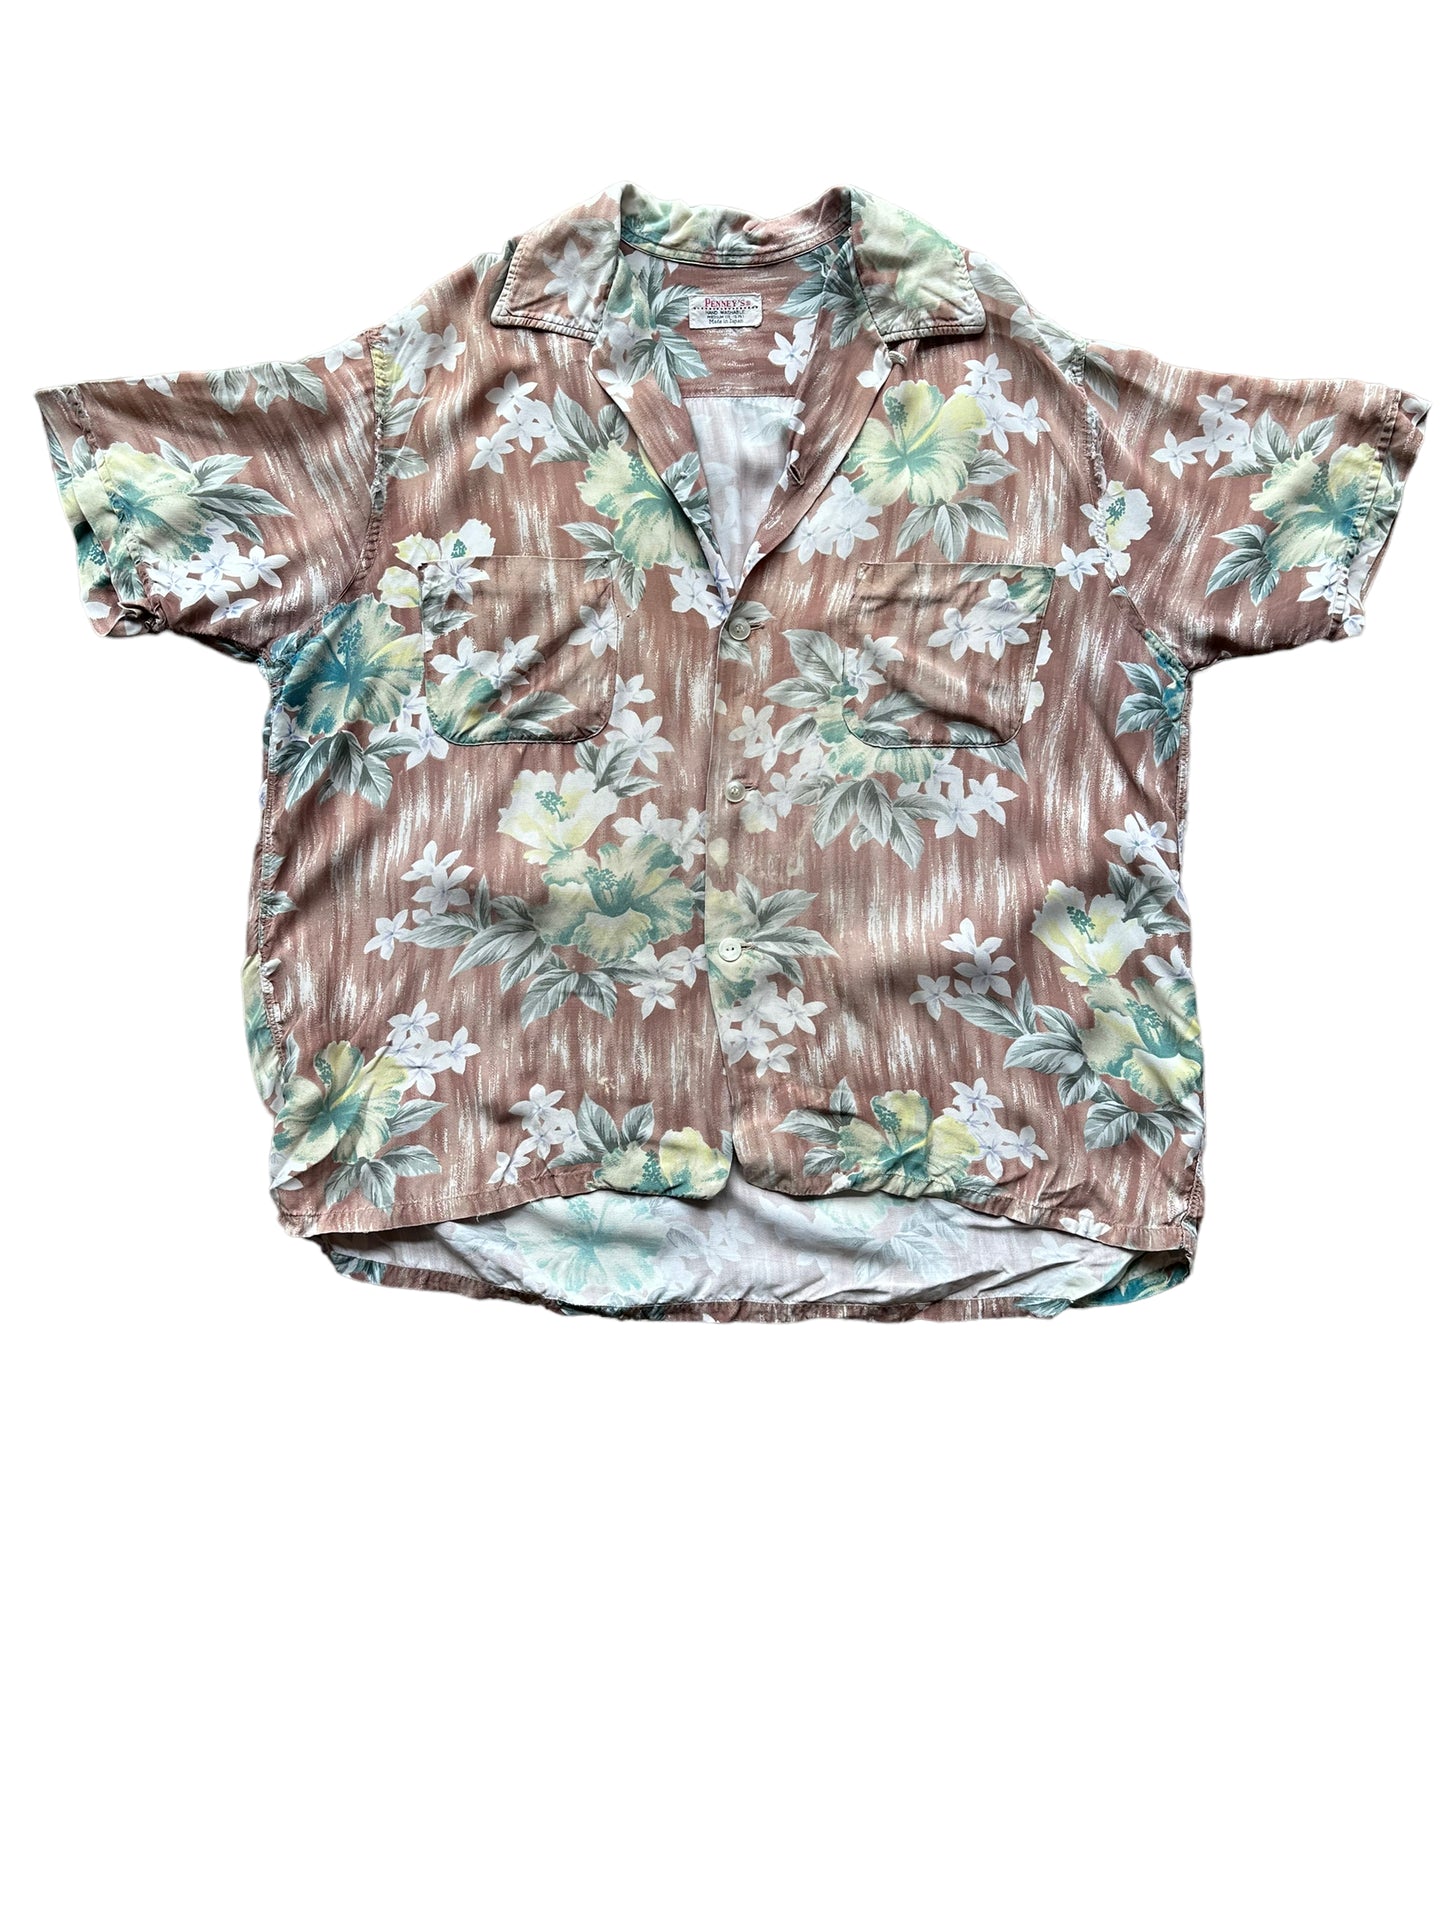 Front shot of Vintage Made in Japan Penney's Brown/Green Floral Aloha Shirt SZ M | Seattle Vintage Rayon Hawaiian Shirt | Barn Owl Vintage Clothing Seattle